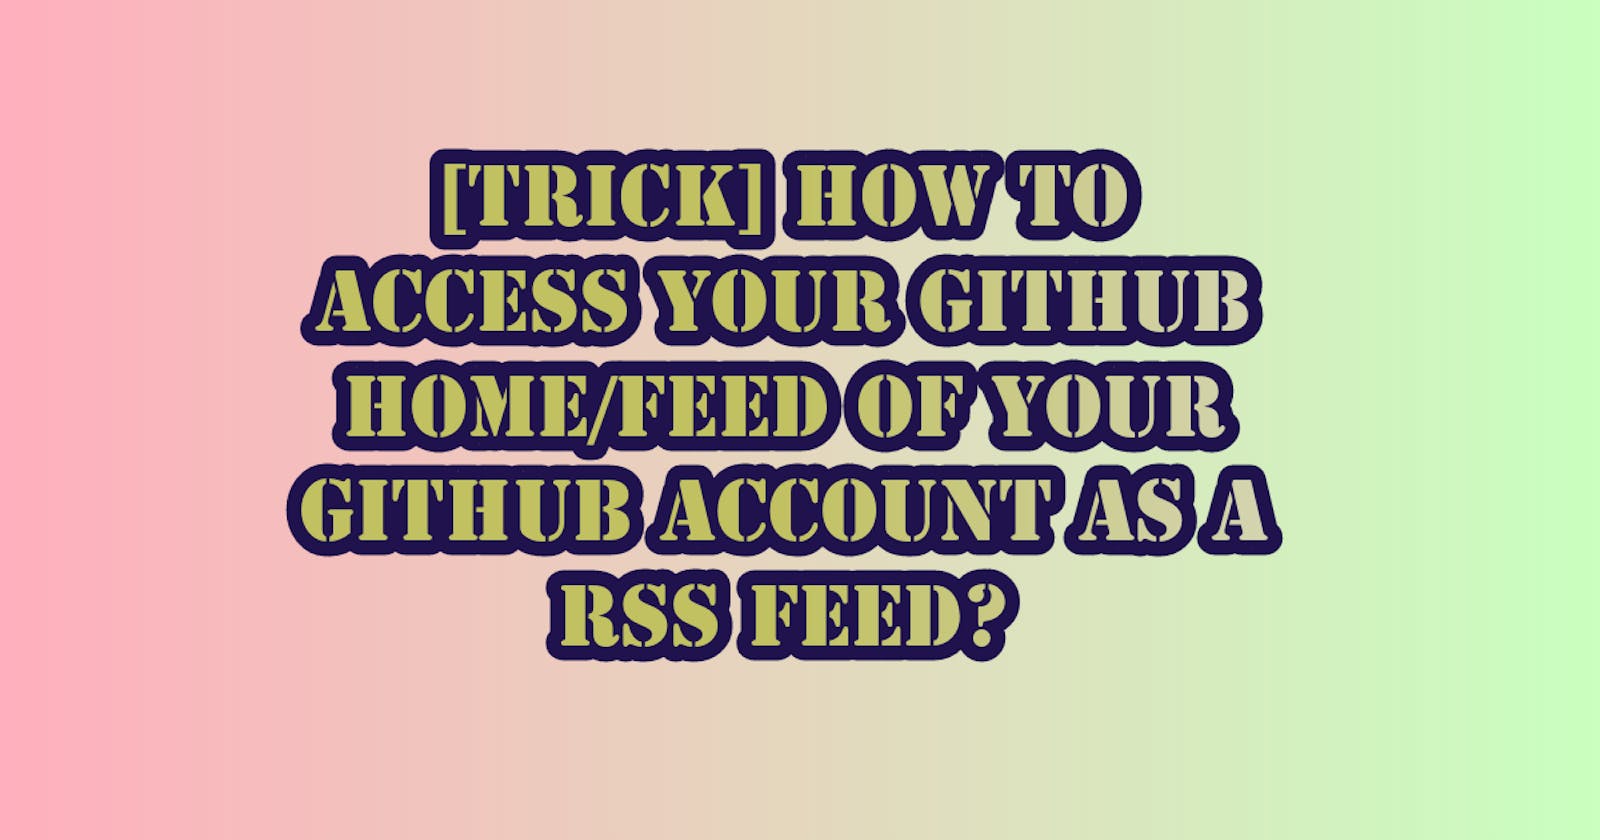 [Trick] How To Access Your GitHub Home/Feed of Your GitHub Account As A RSS Feed?